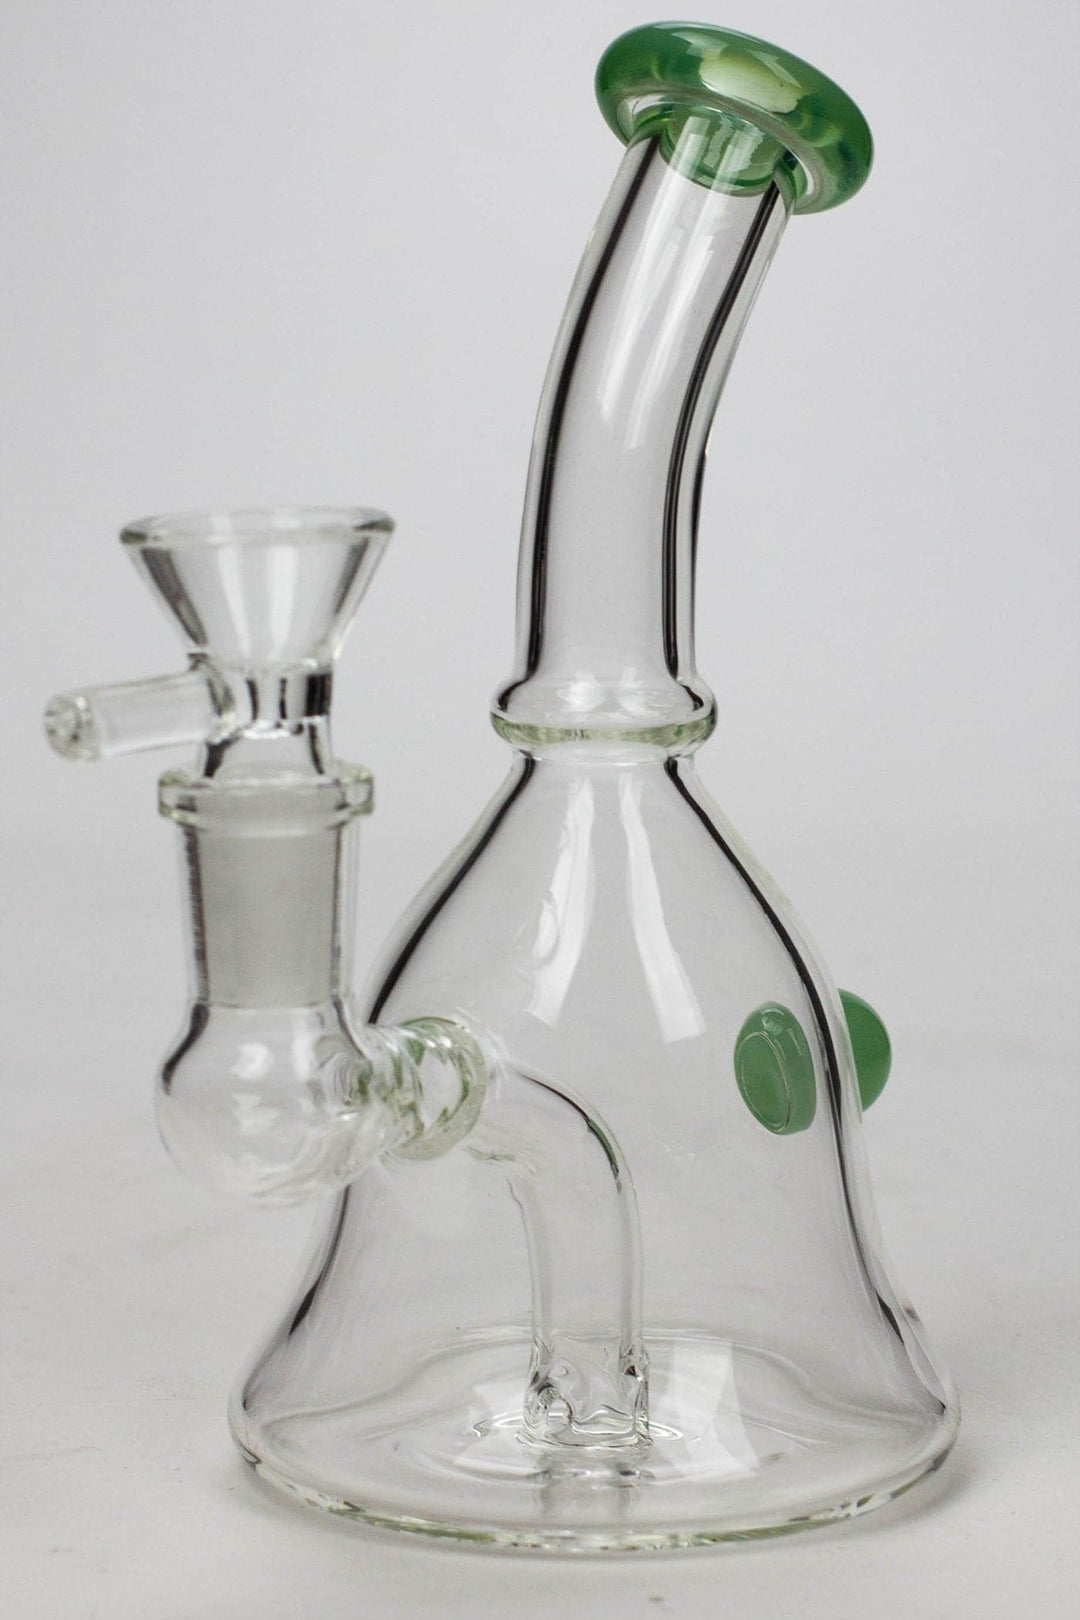 Fixed 3 hole diffuser bell bubbler_17